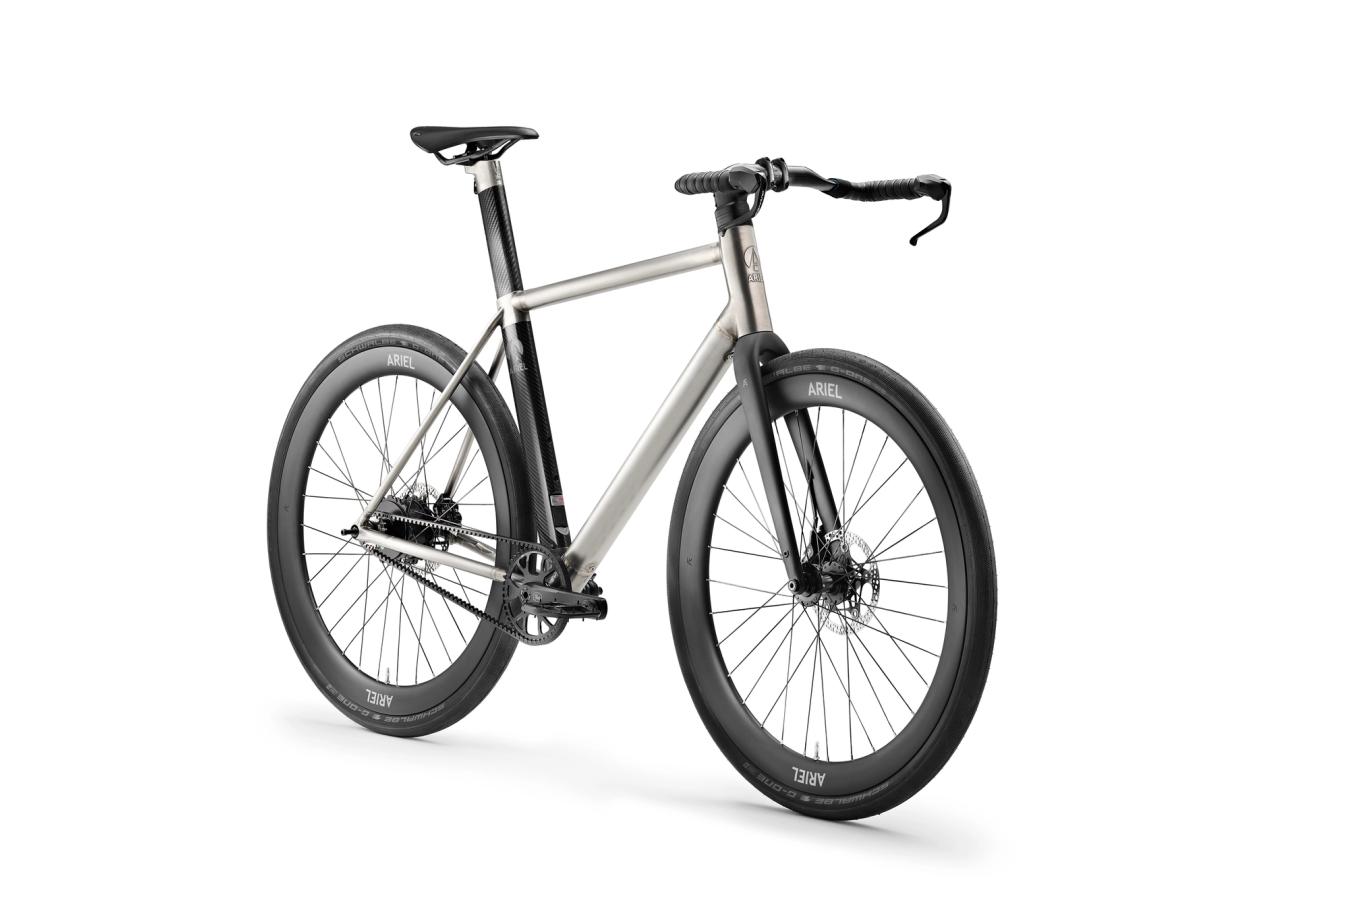 The Urban is based around a Gates single-speed belt drive transmission 